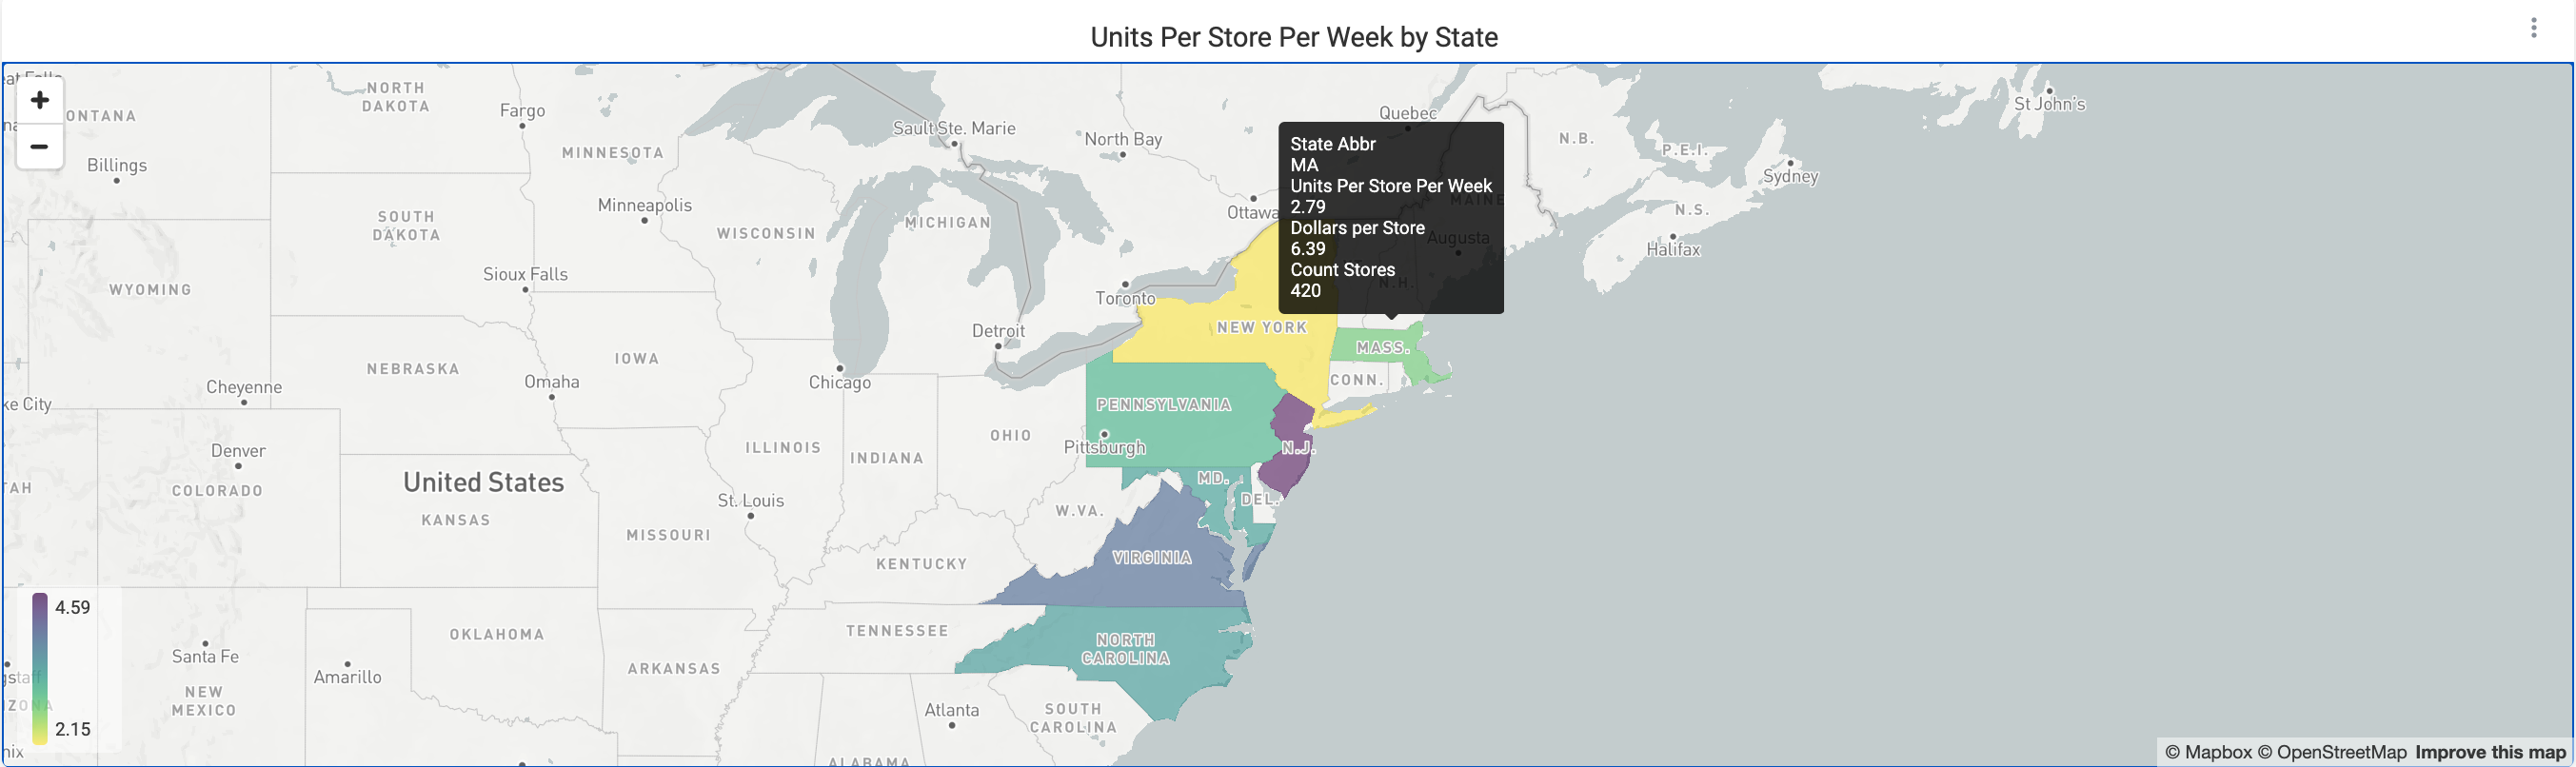 Units_Per_Store_Per_Week_by_State.png